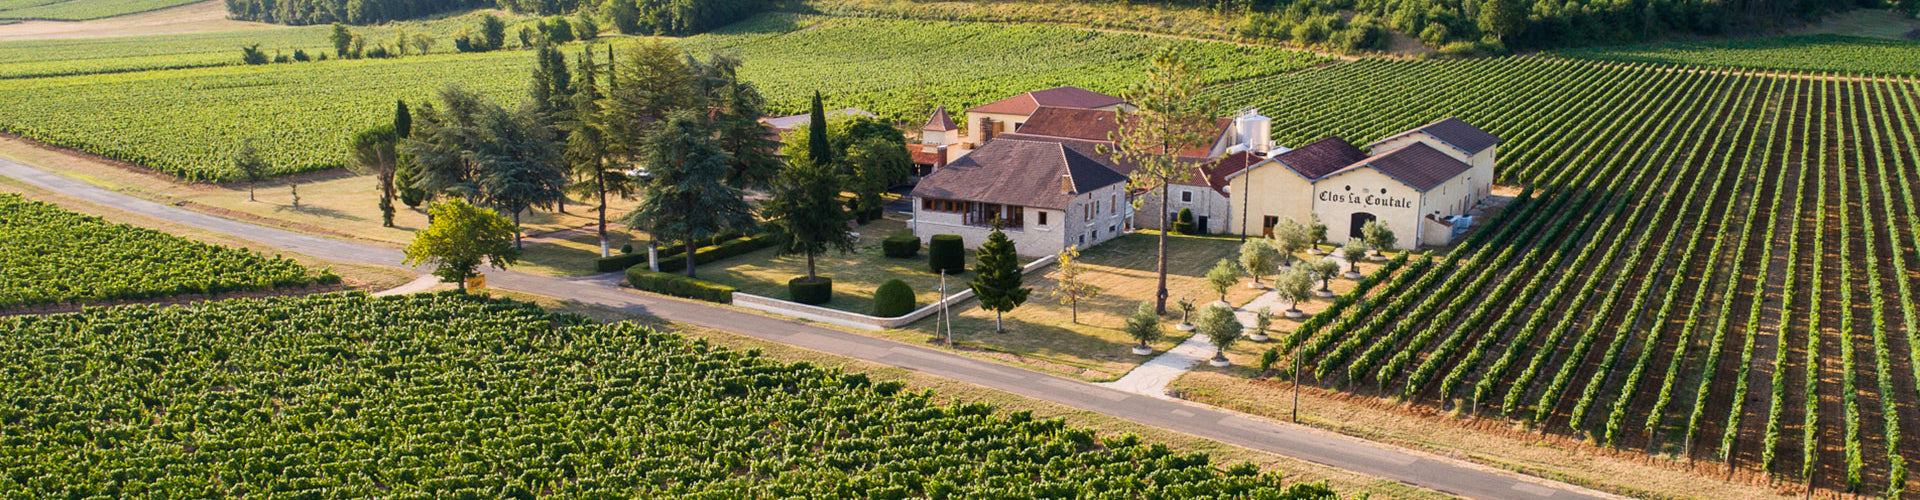 Clos La Coutale Winery and Buildings in Cahors, South West France